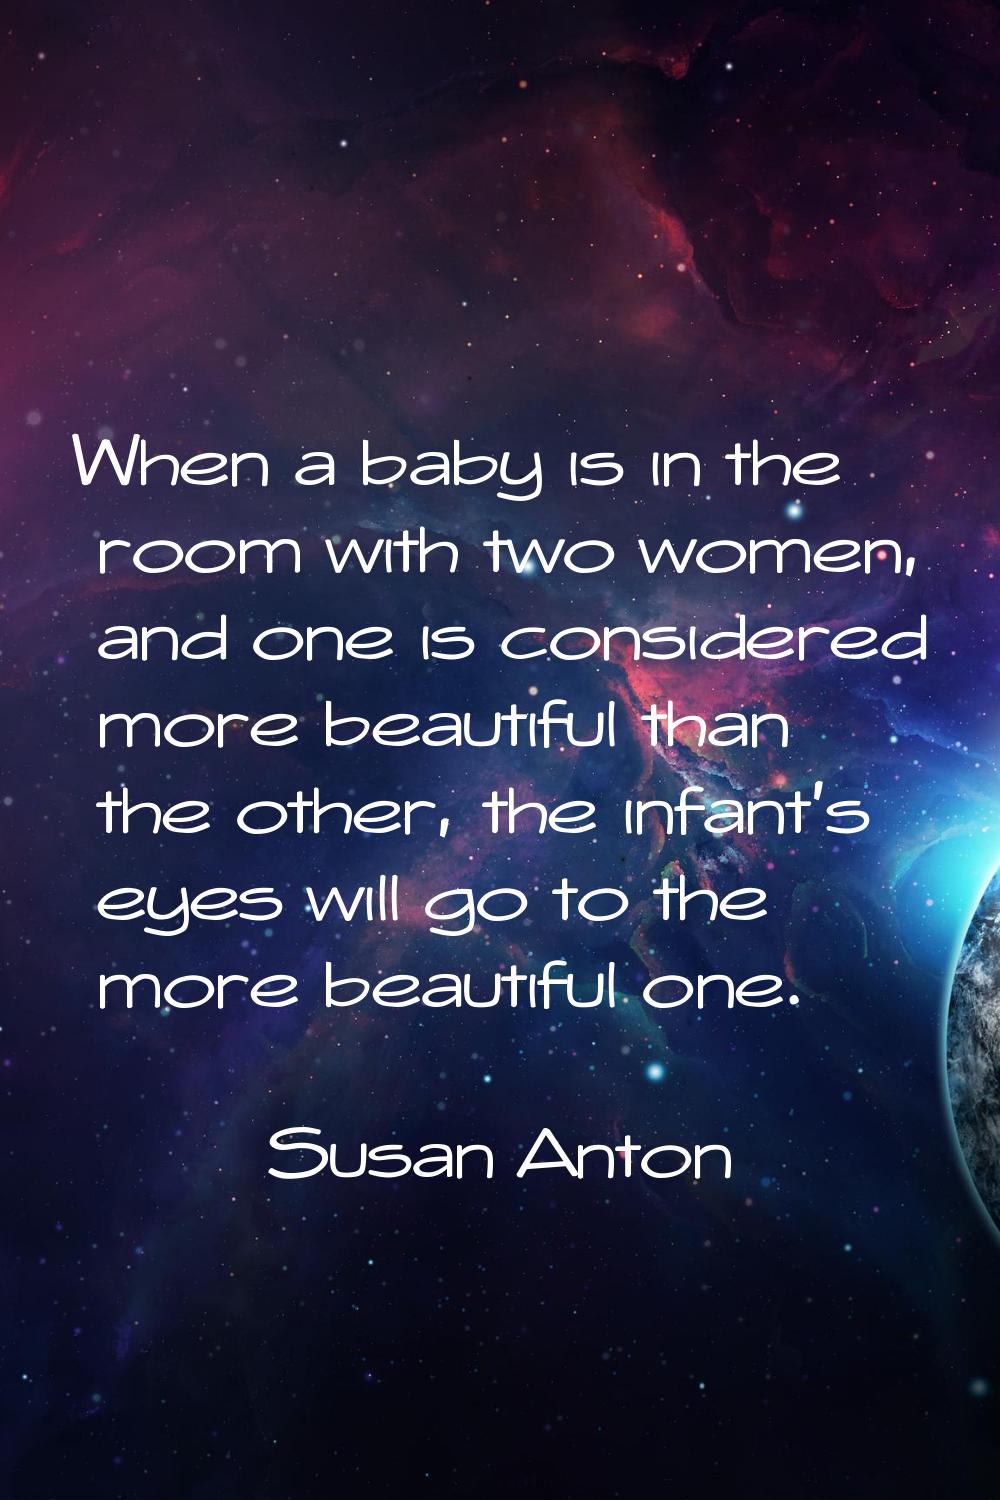 When a baby is in the room with two women, and one is considered more beautiful than the other, the